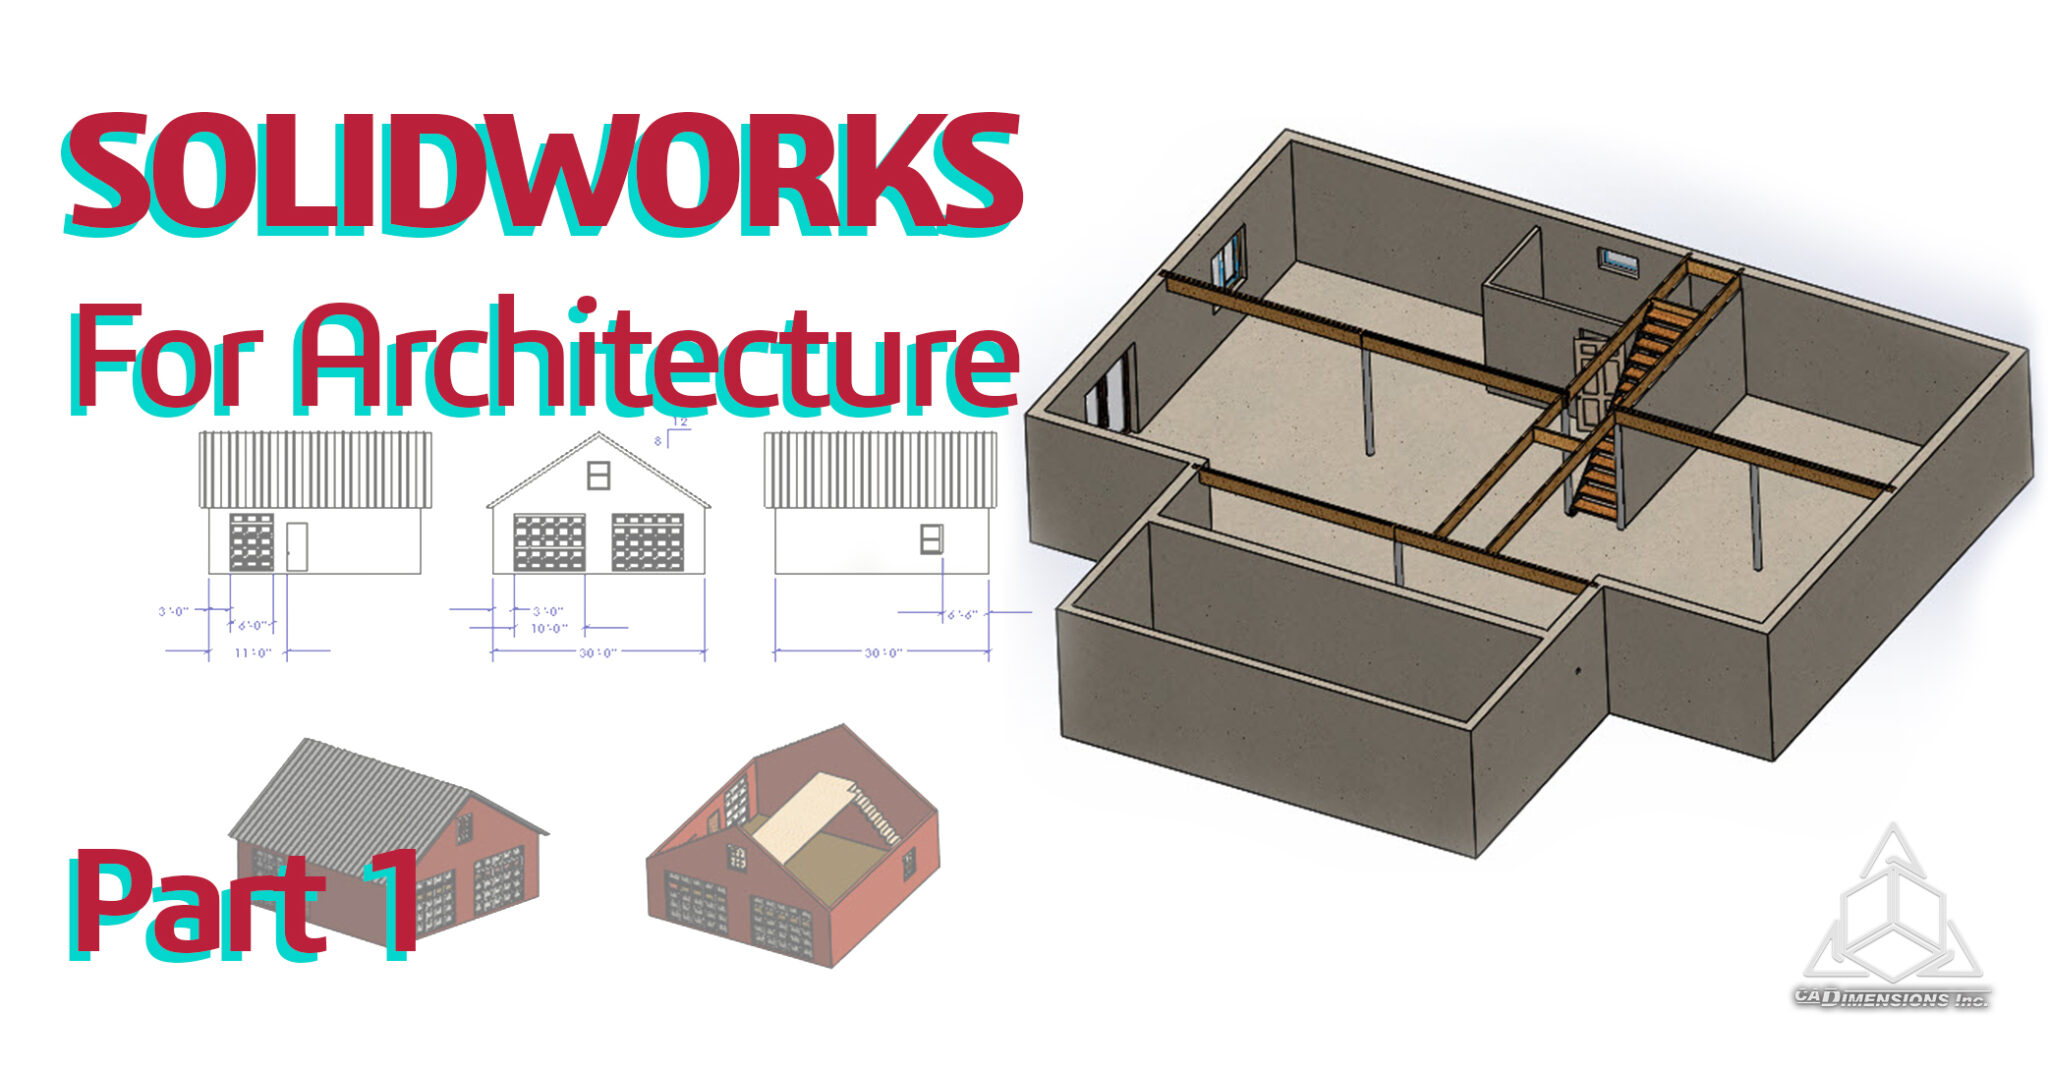 SOLIDWORKS For Architecture